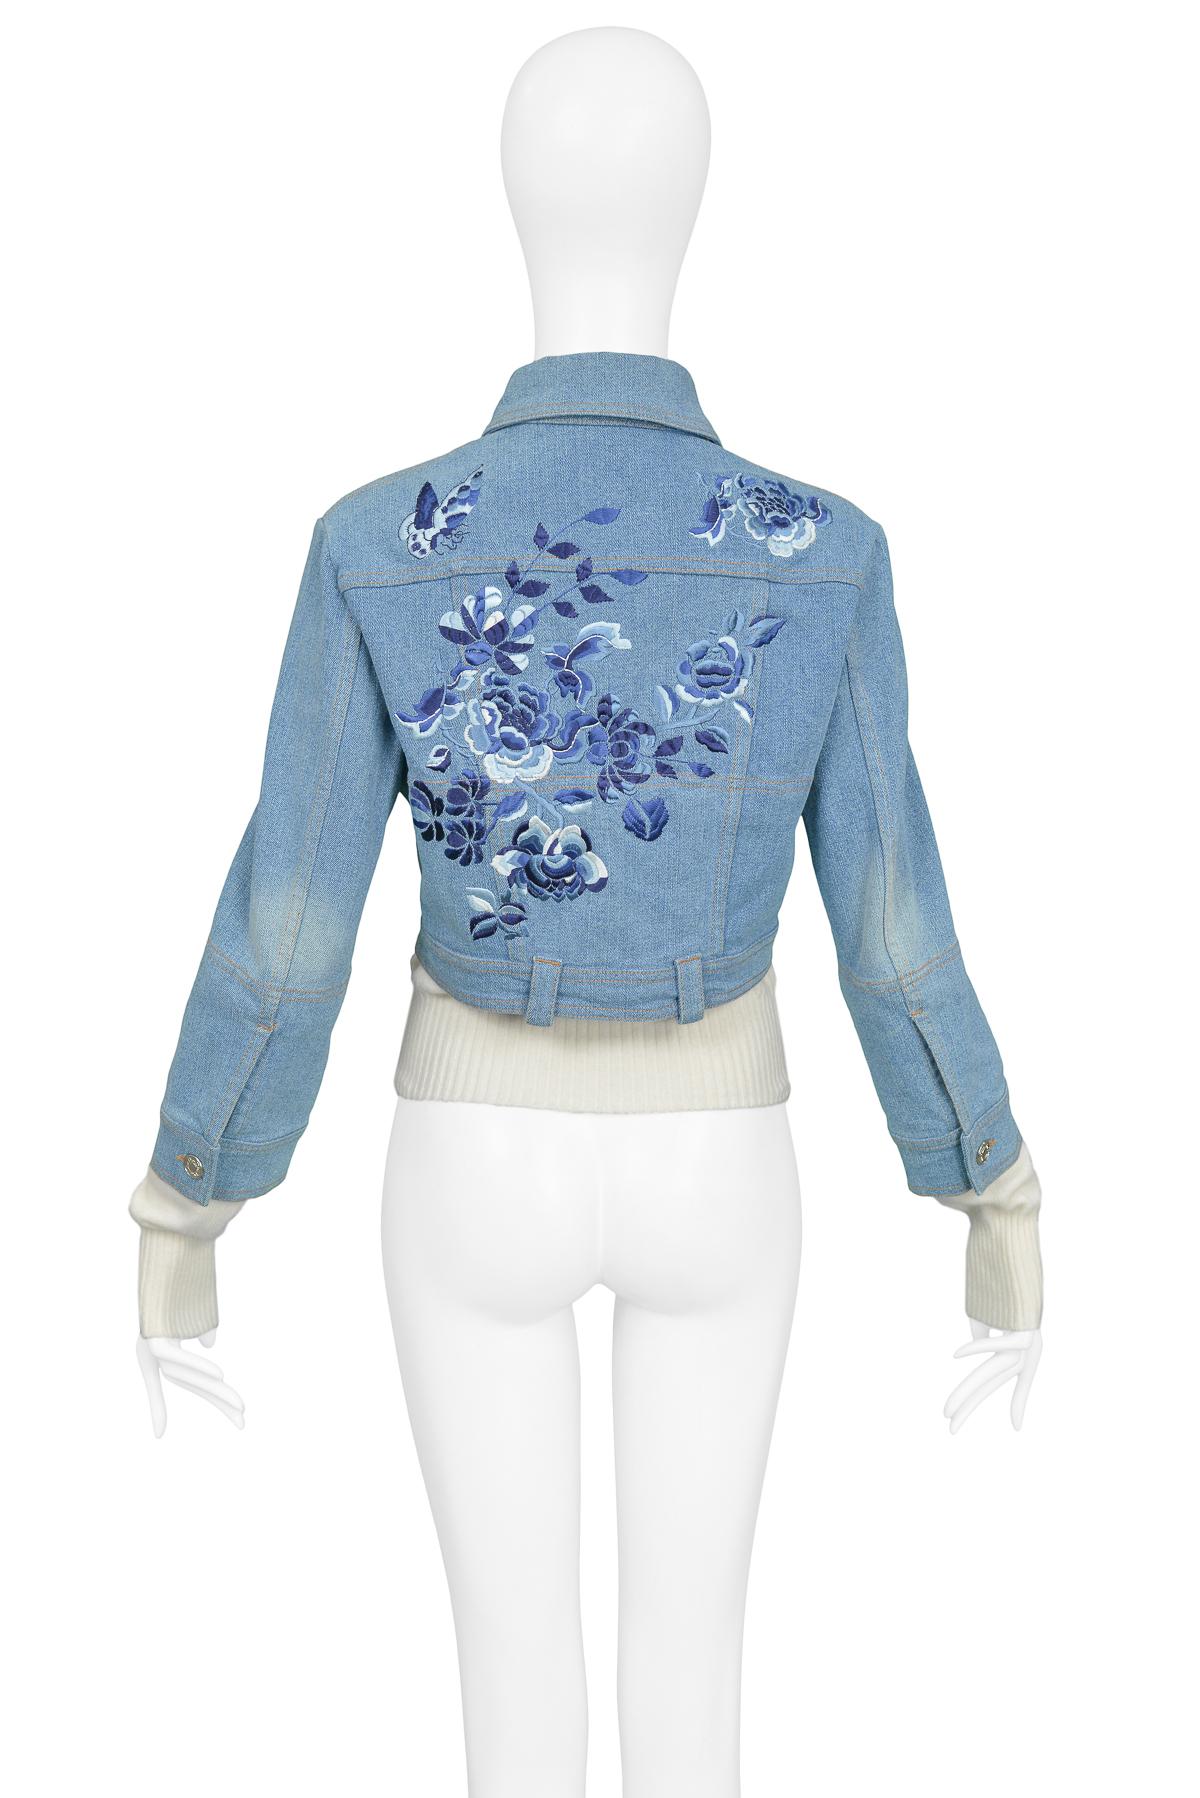 Dior Denim Blue Embroidered & Knit Jacket In Excellent Condition For Sale In Los Angeles, CA